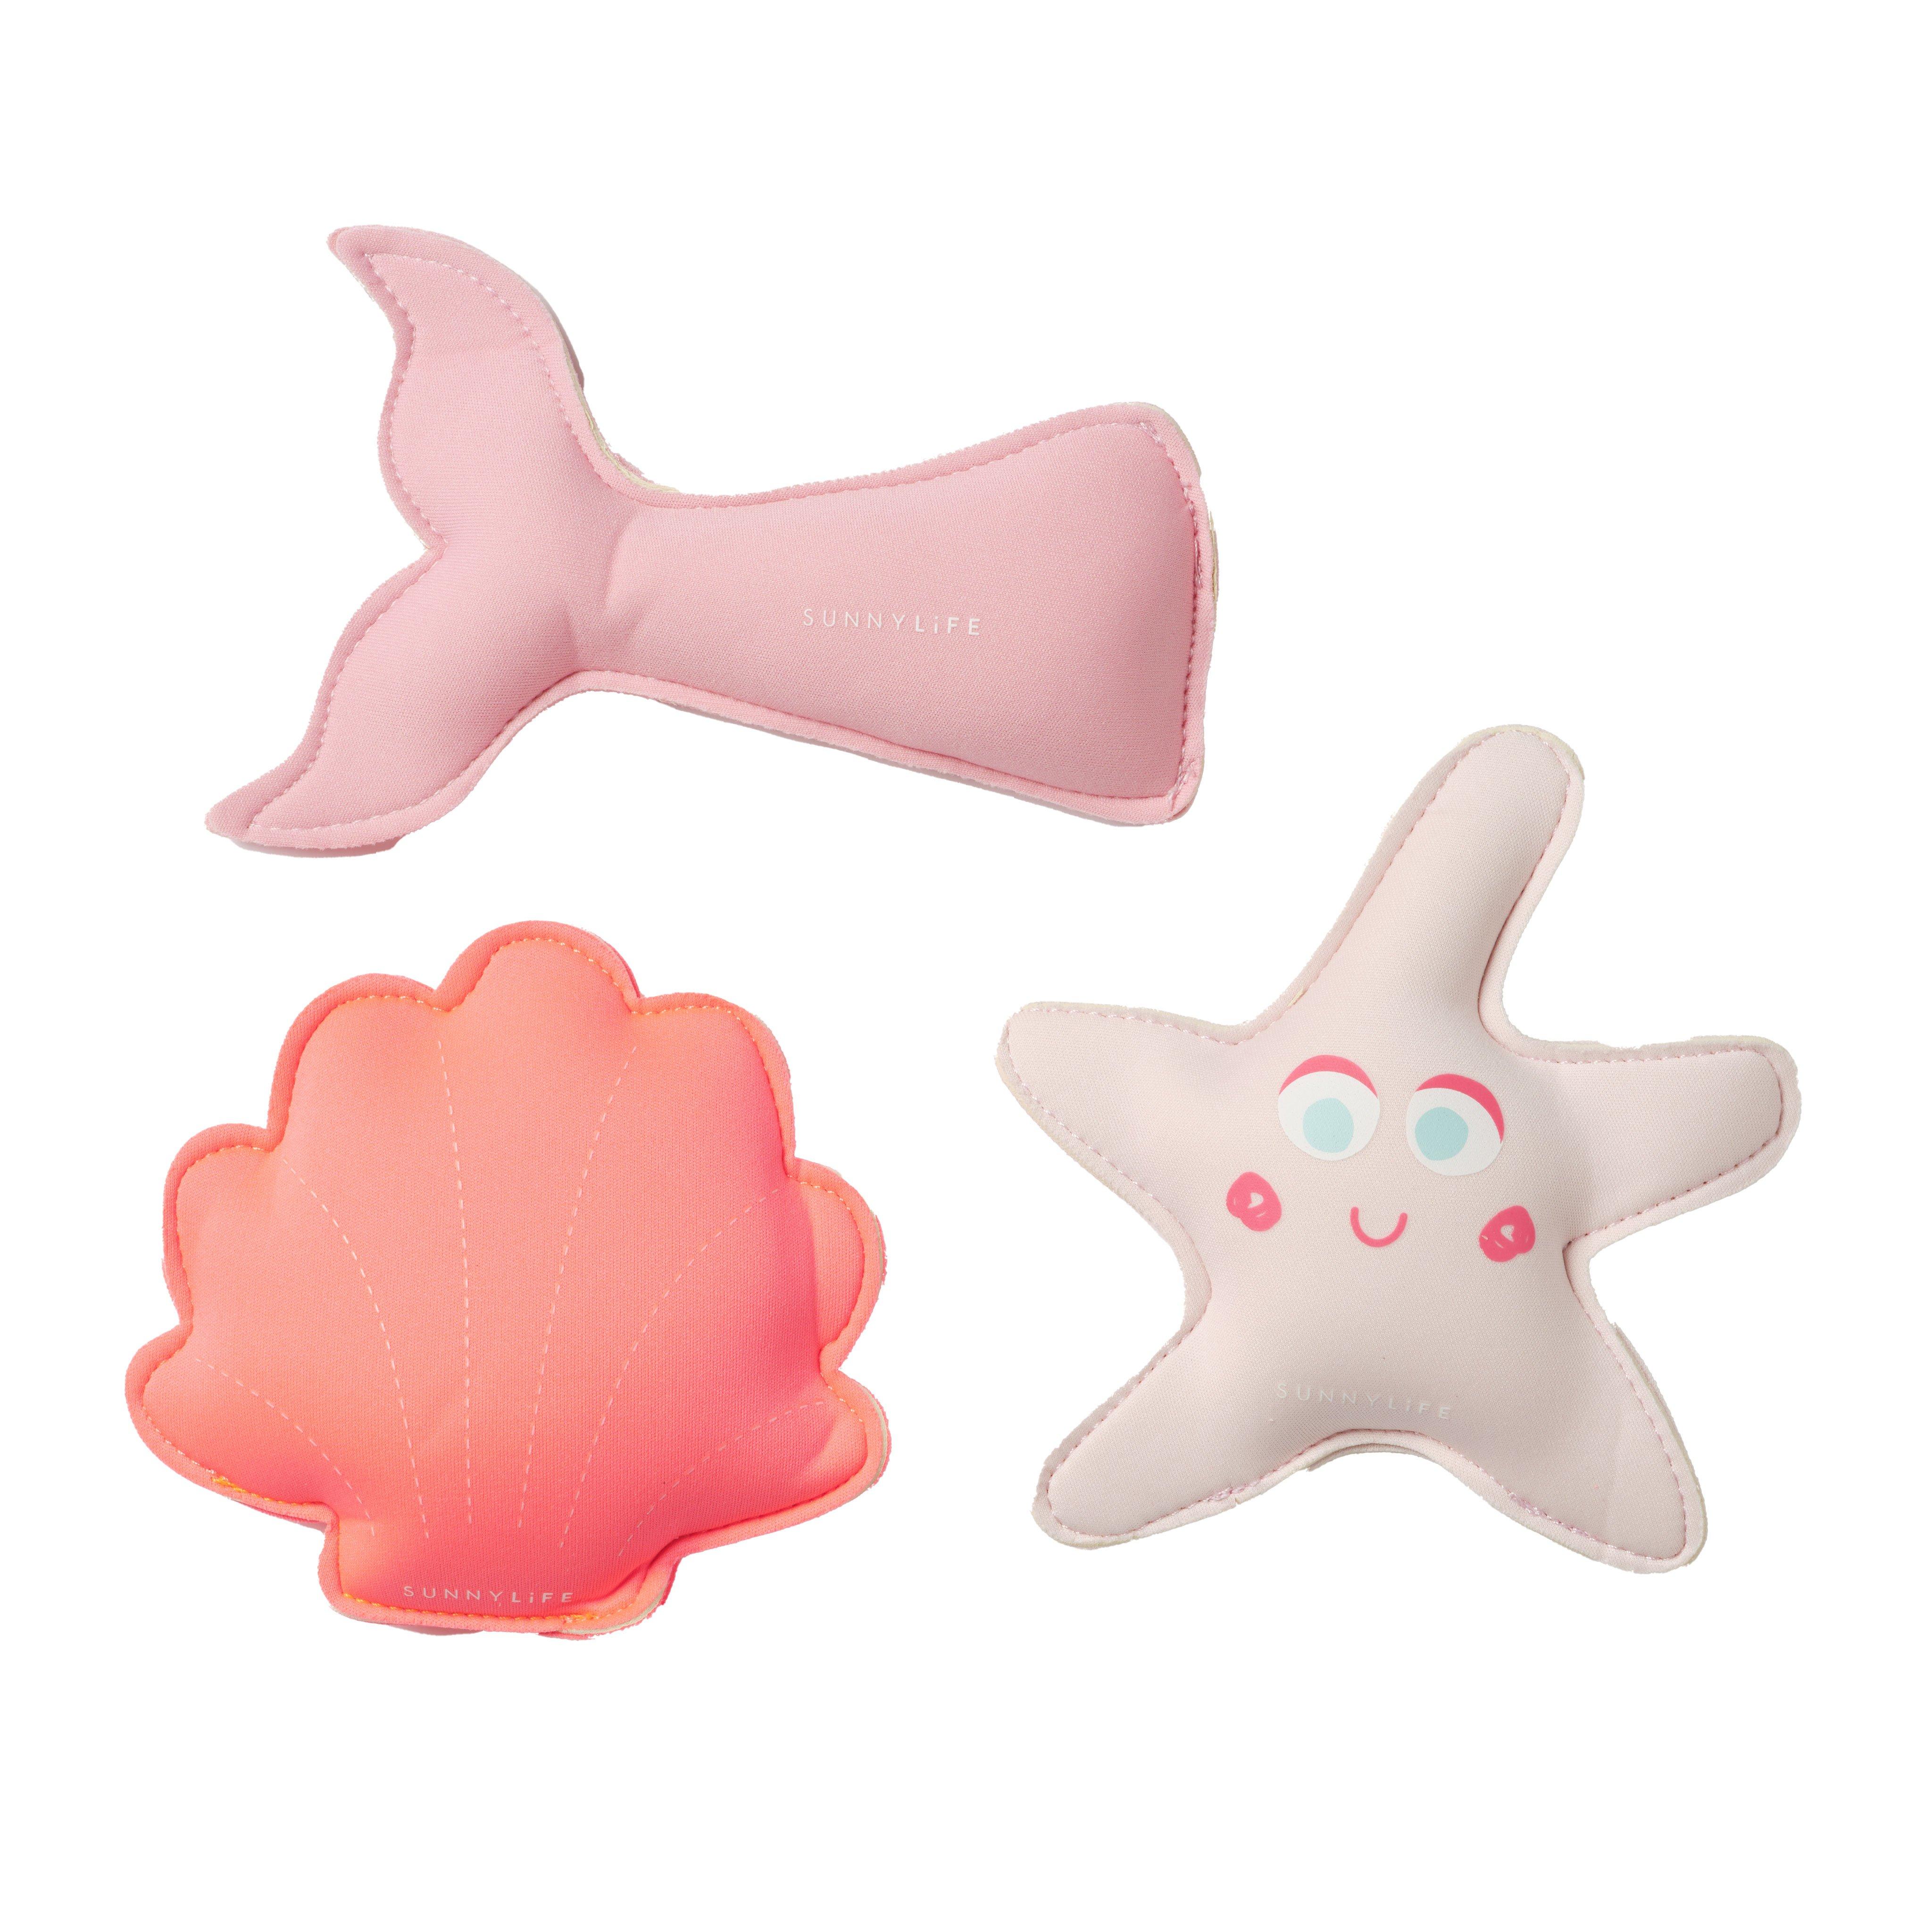 SUNNYLiFE  Melody the Mermaid Dive Buddies Neon Strawberry Set of 3